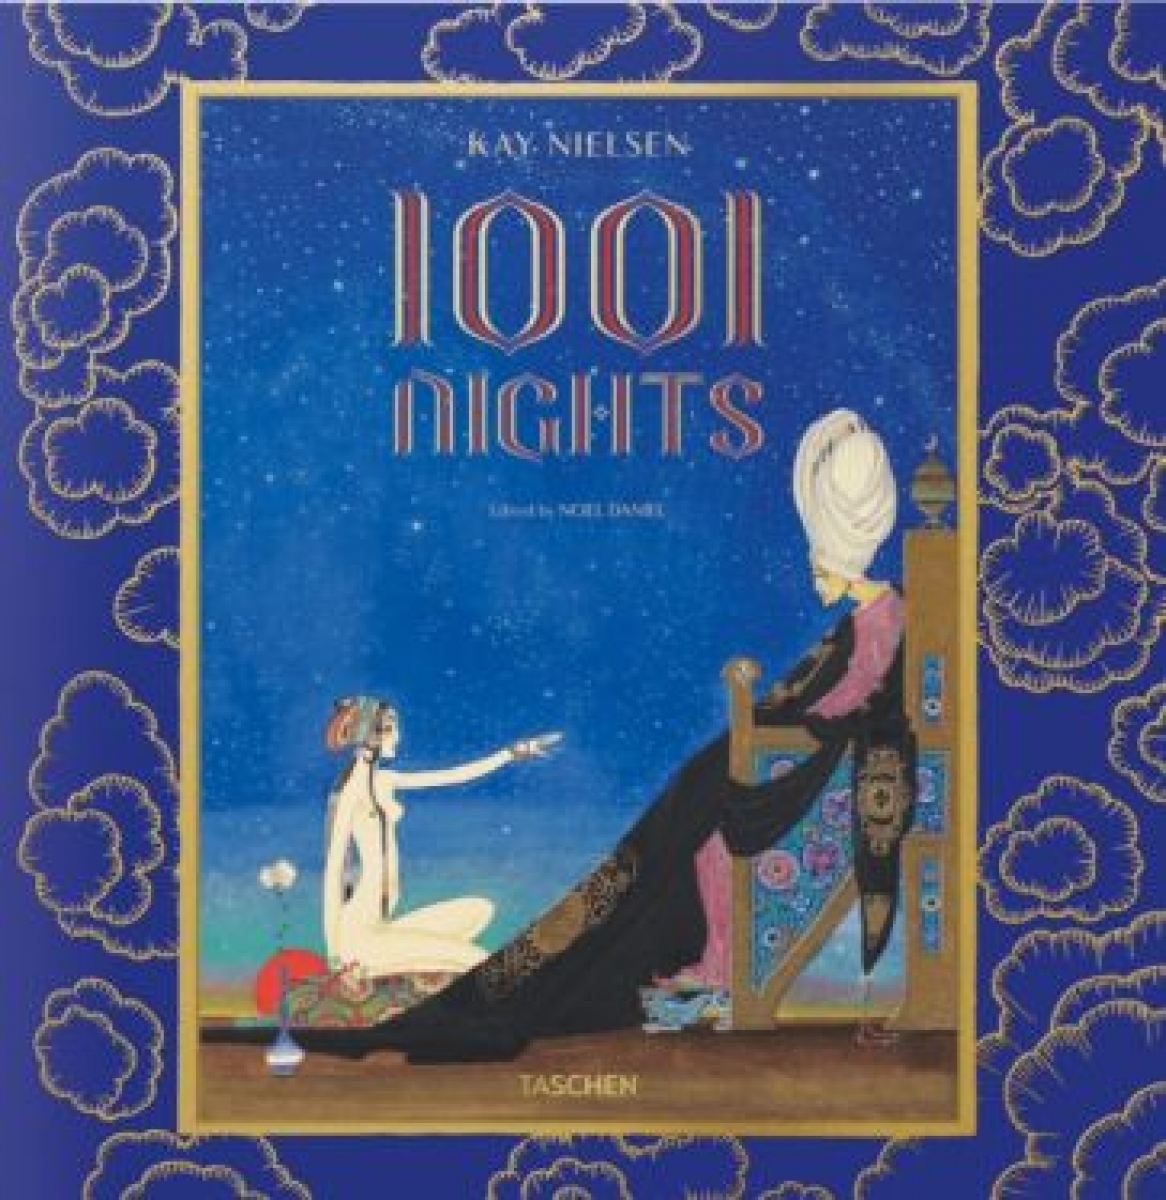 Kay Nielsen's A Thousand and One Nights 